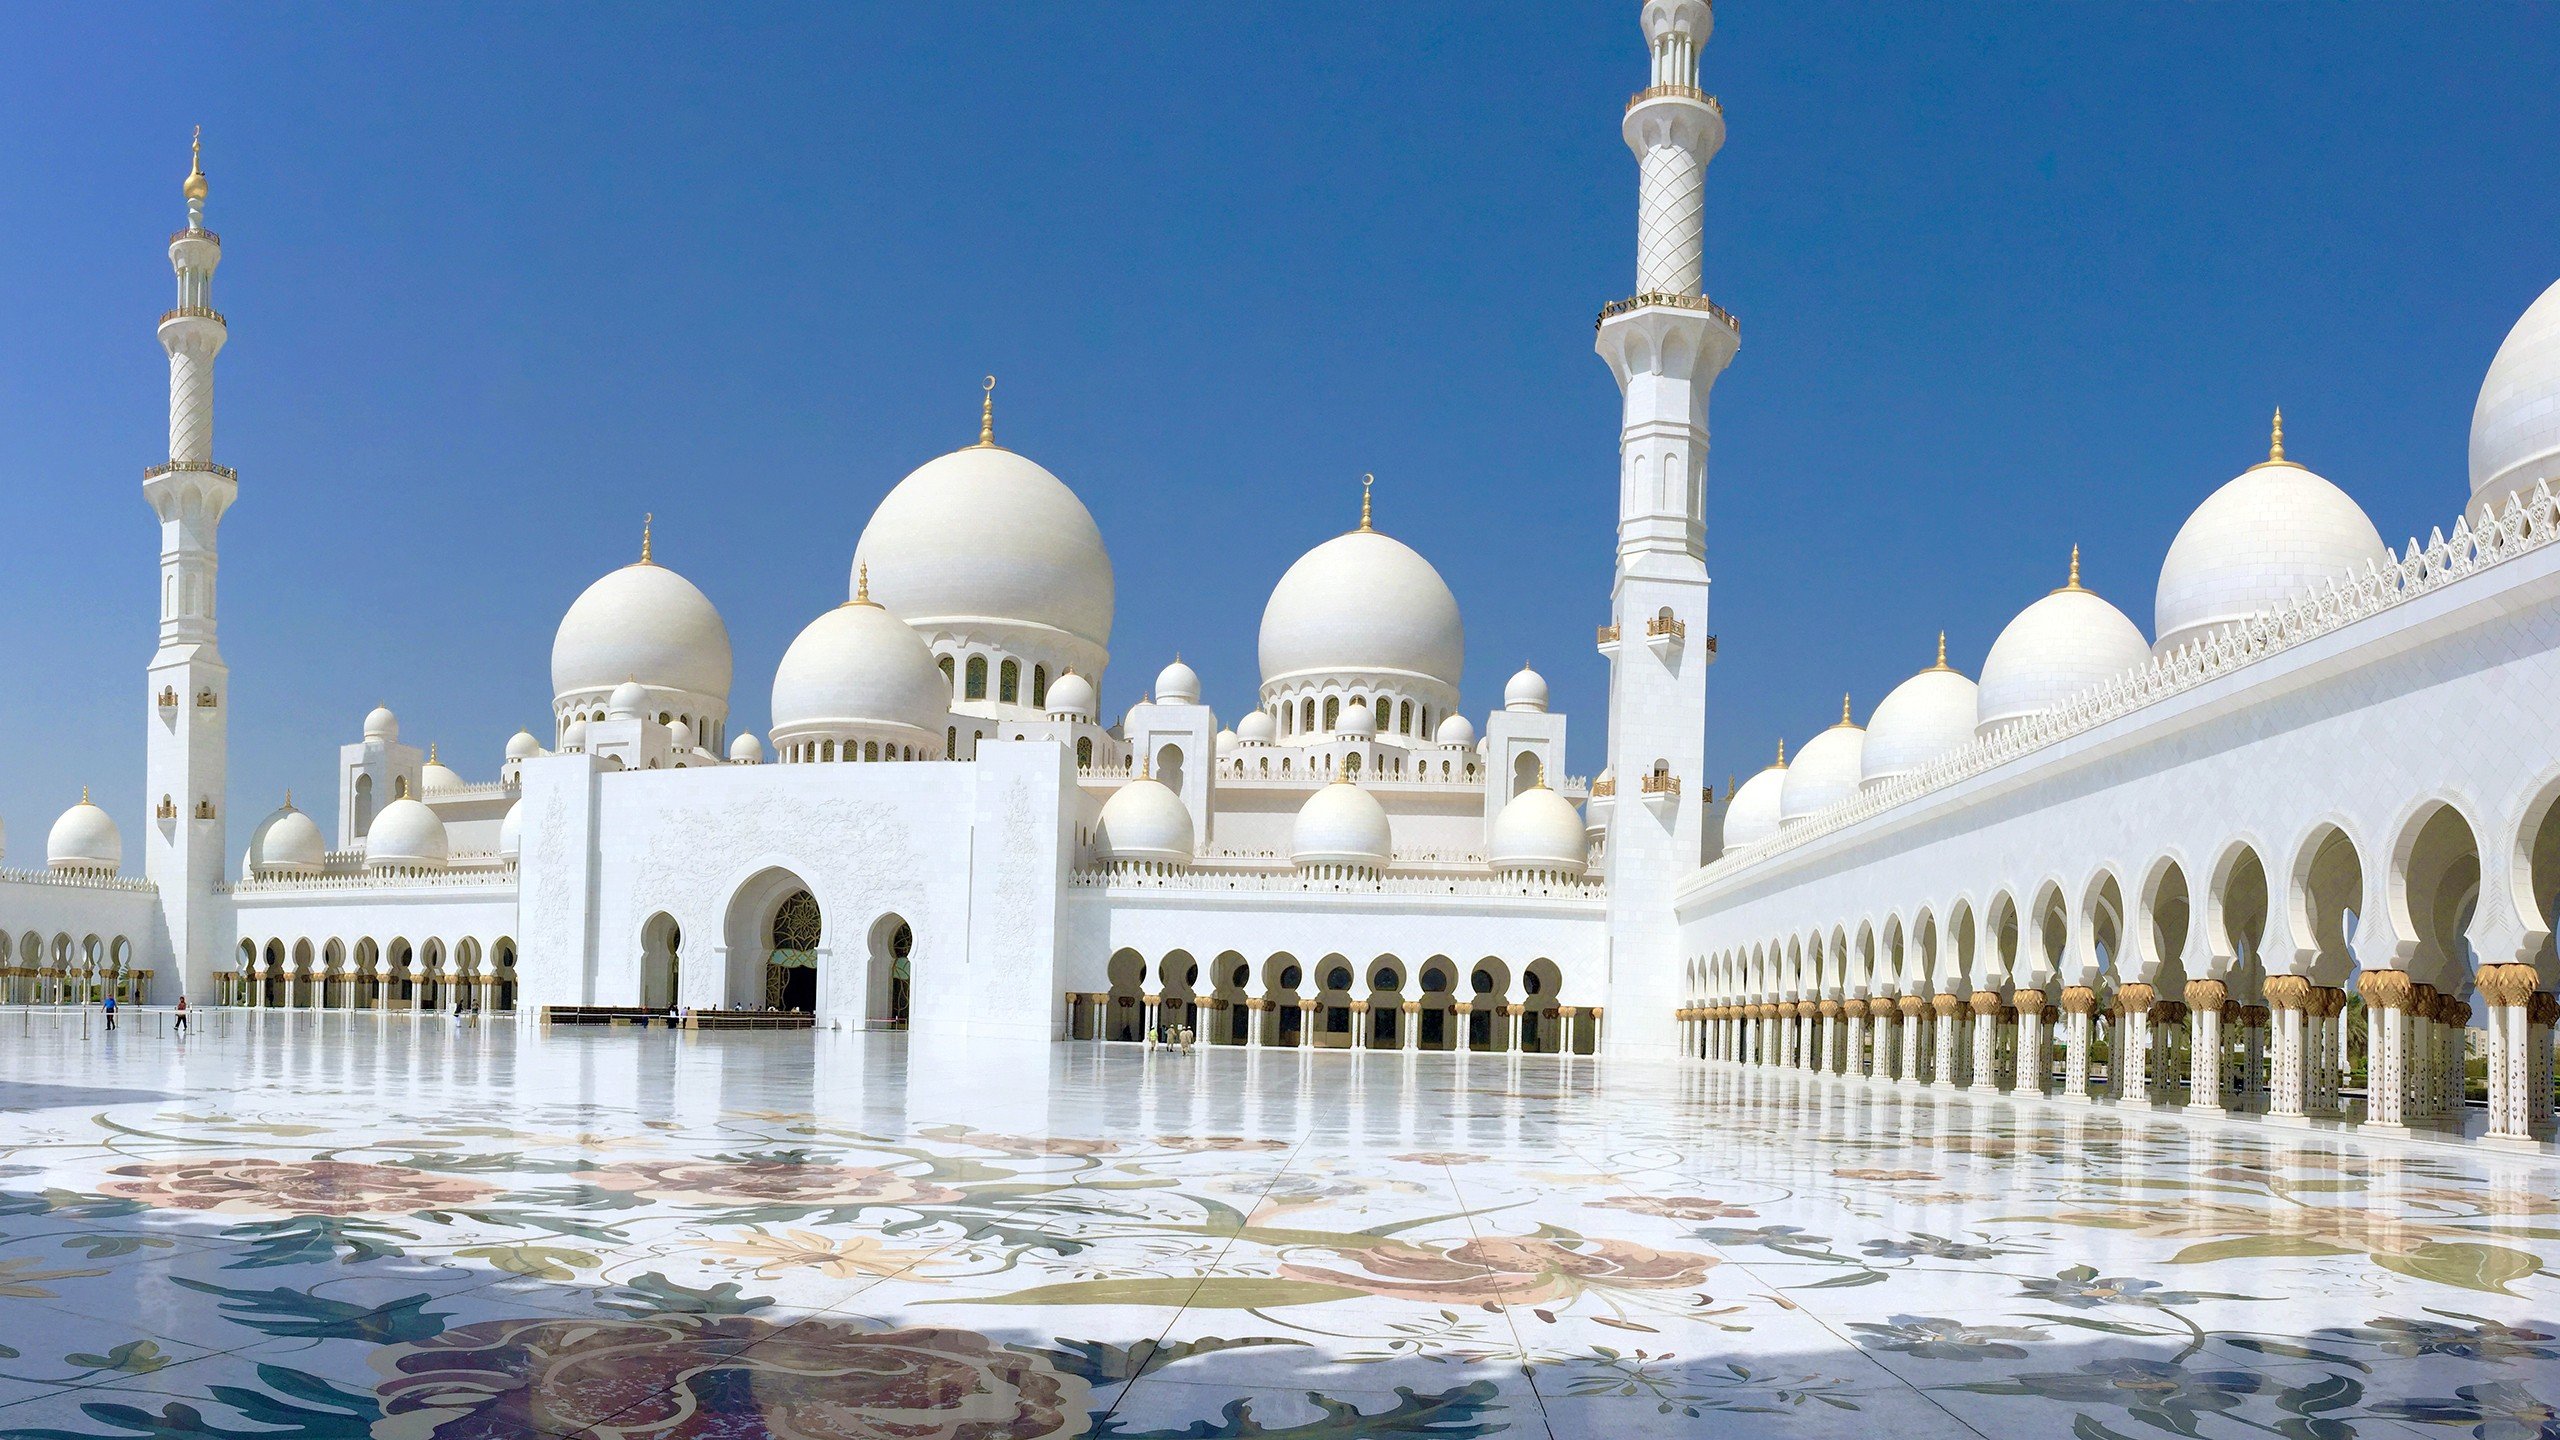 Abu Dhabi, Islamic architecture, Architecture, Sunlight, Arch, Marble, Mosque Wallpaper